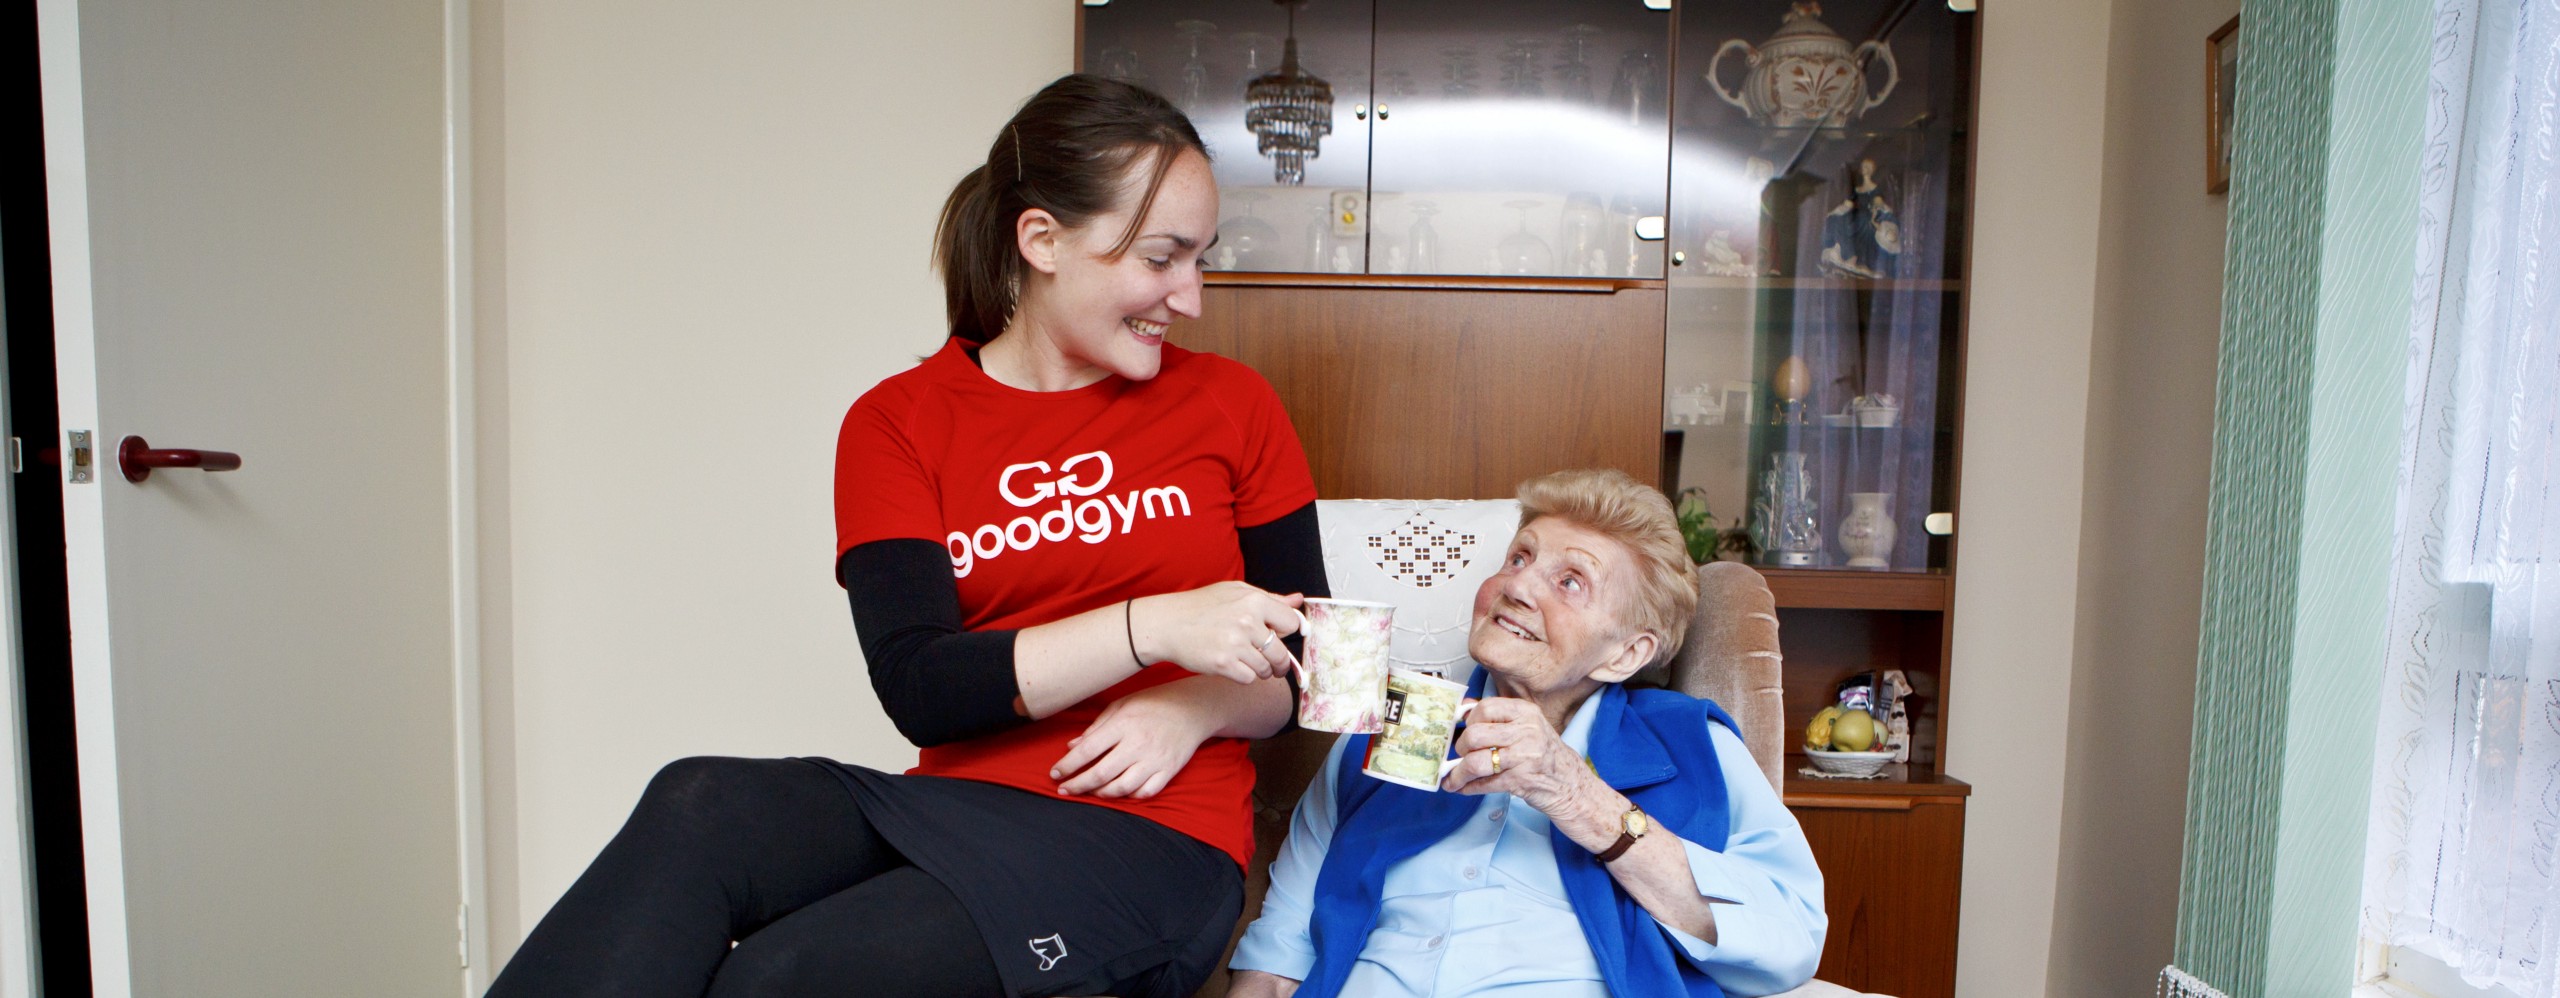 Two women–one older in a chair, one younger and wearing a GoodGym t-shirt–drink tea together.